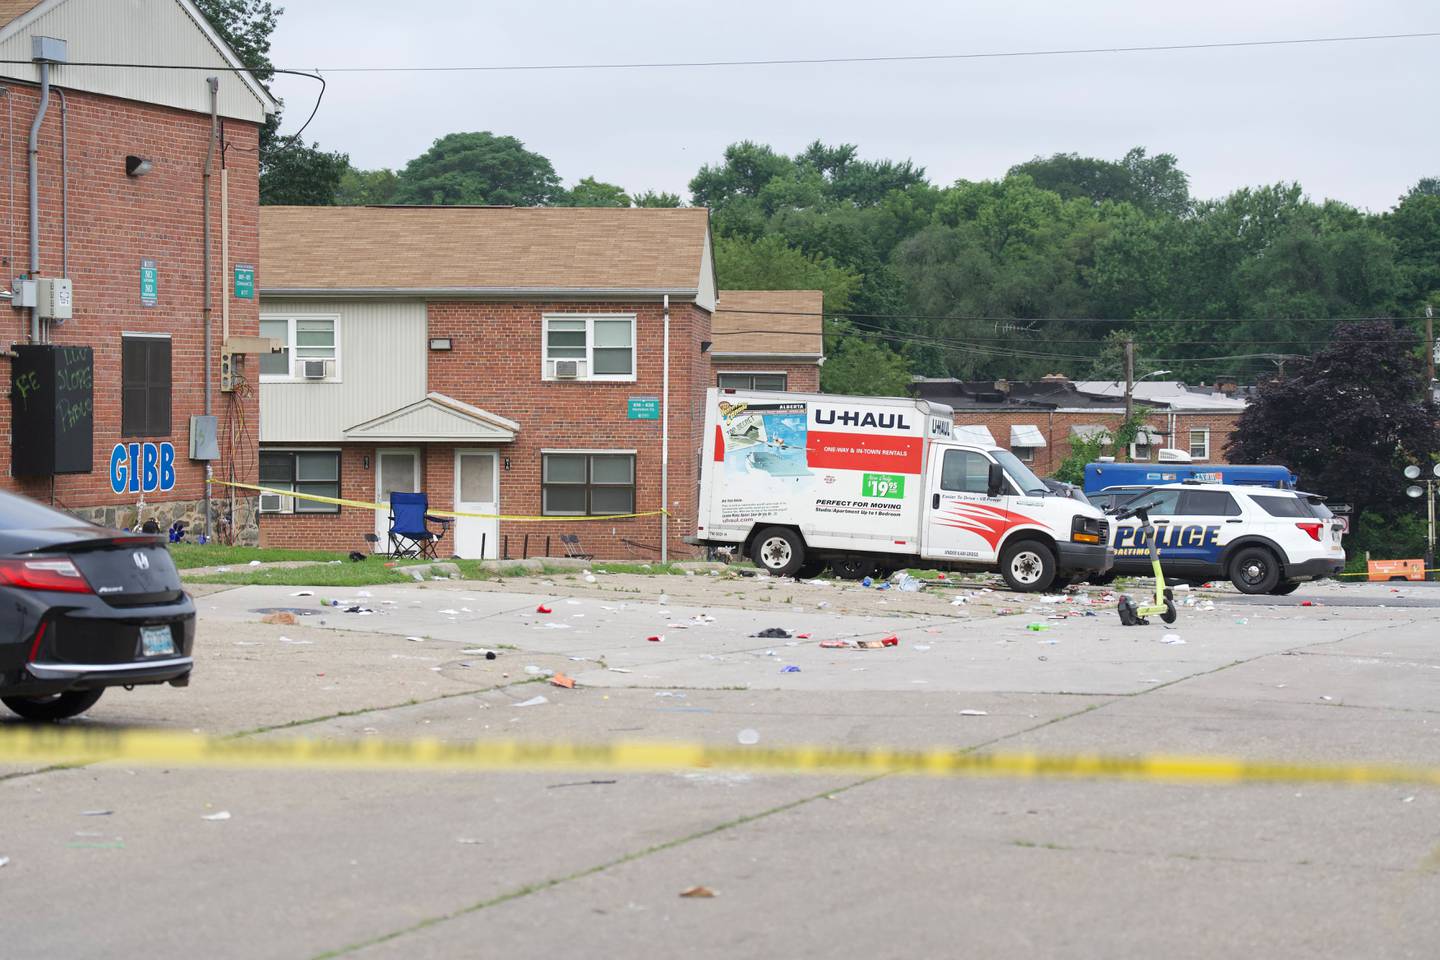 A row of two story brick buildings stands in the background. In the foreground is police tape. A U-Haul truck and police vehicles are visible.